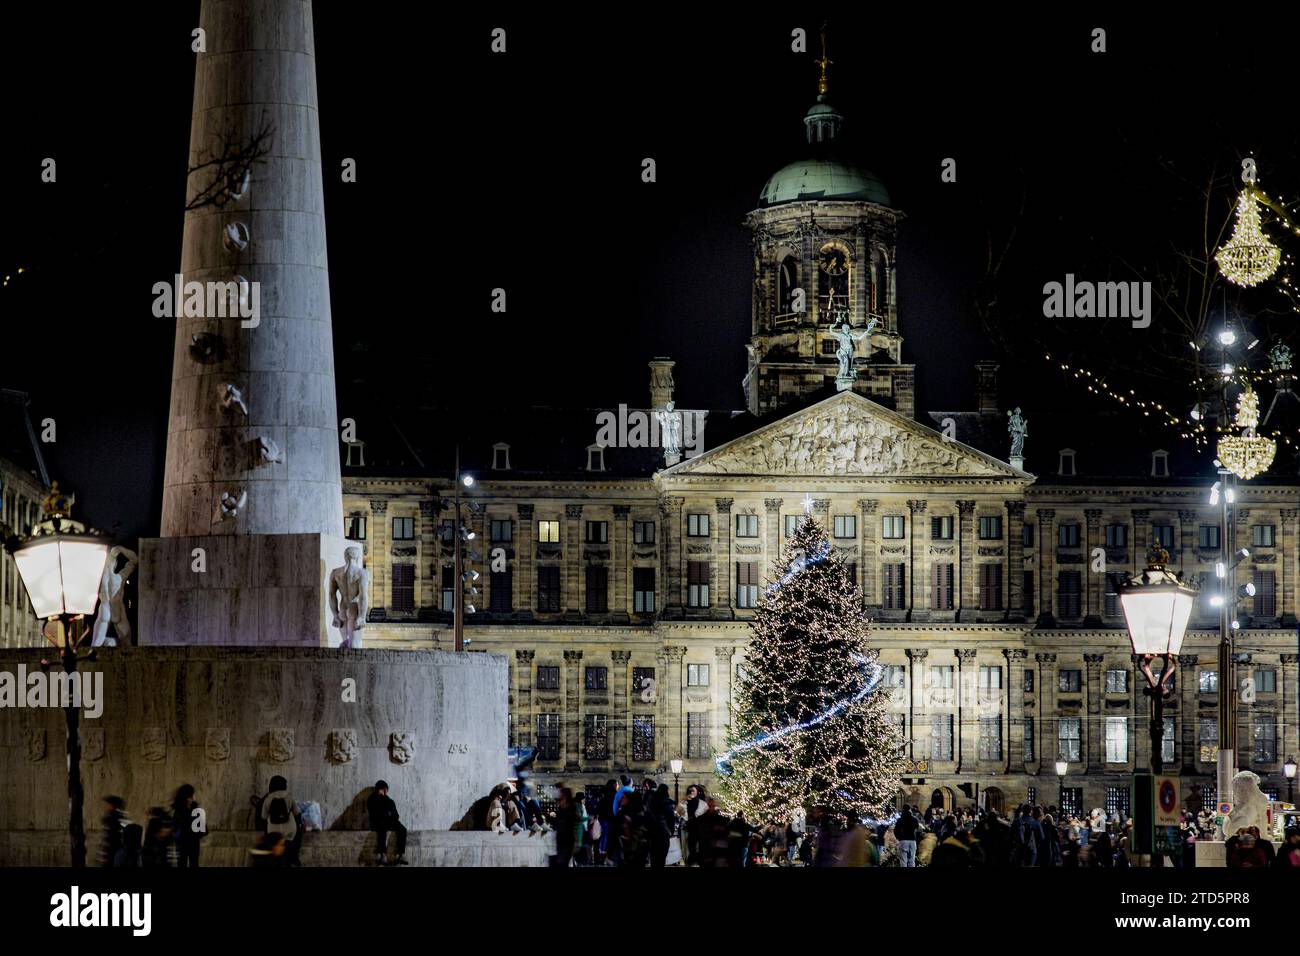 AMSTERDAM - The Christmas tree on Dam Square. The Christmas tree is usually placed earlier in December, but this was postponed this year due to the state visit of South Korean President Yoon Suk-yeol. ANP RAMON VAN FLYMEN netherlands out - belgium out Stock Photo